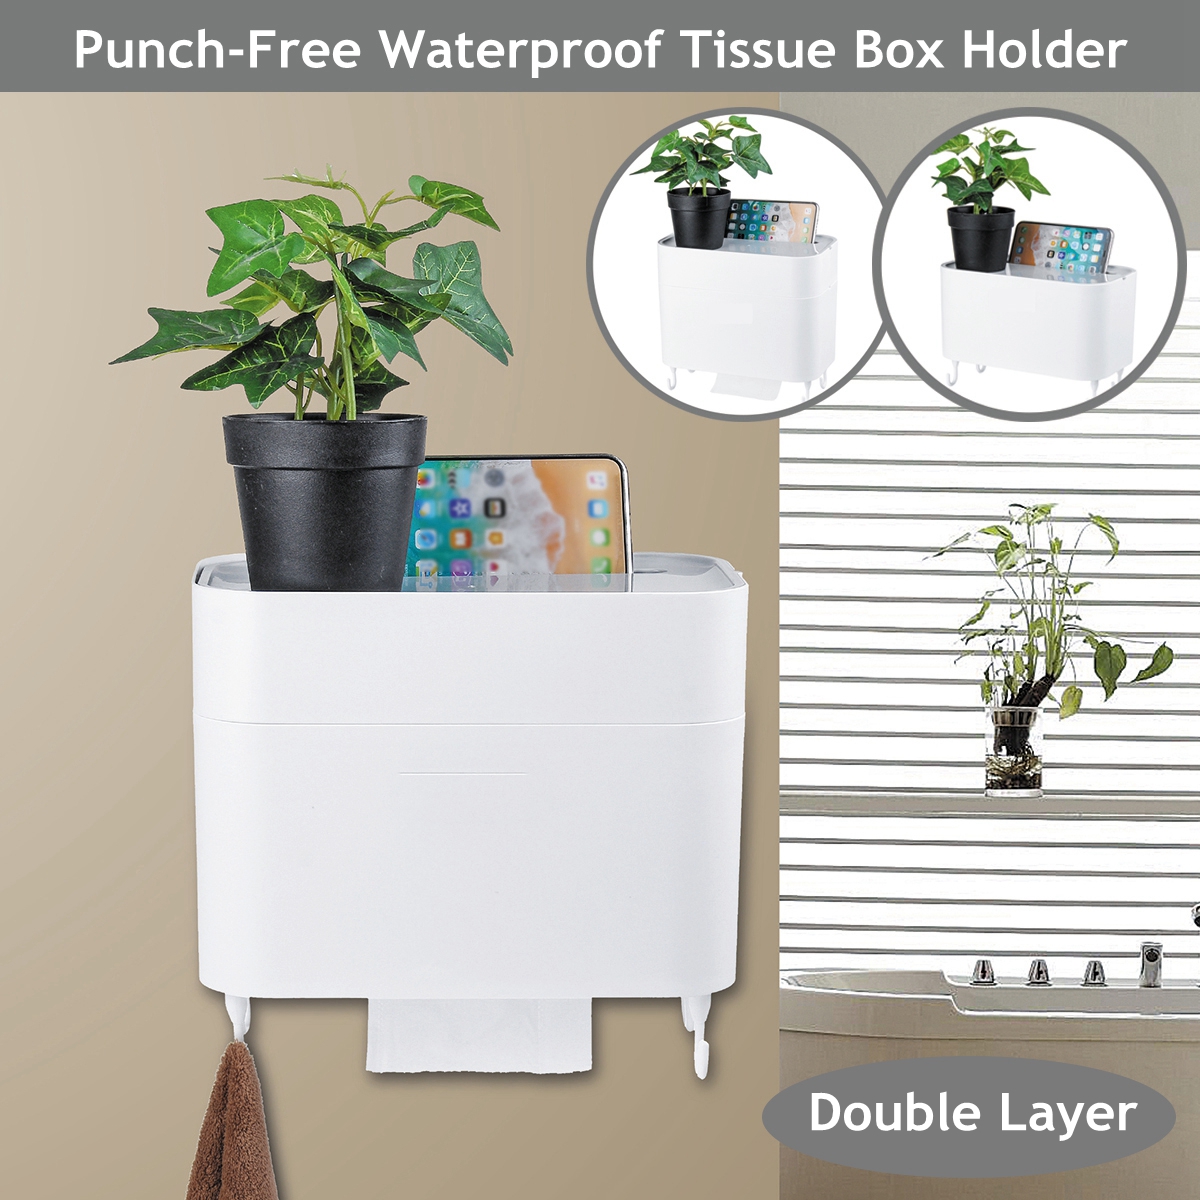 4-Hooks-Toilet-Tissue-Box-Paper-Napkin-Holder-Case-Punch-Free-Wall-Mounted-1796869-1